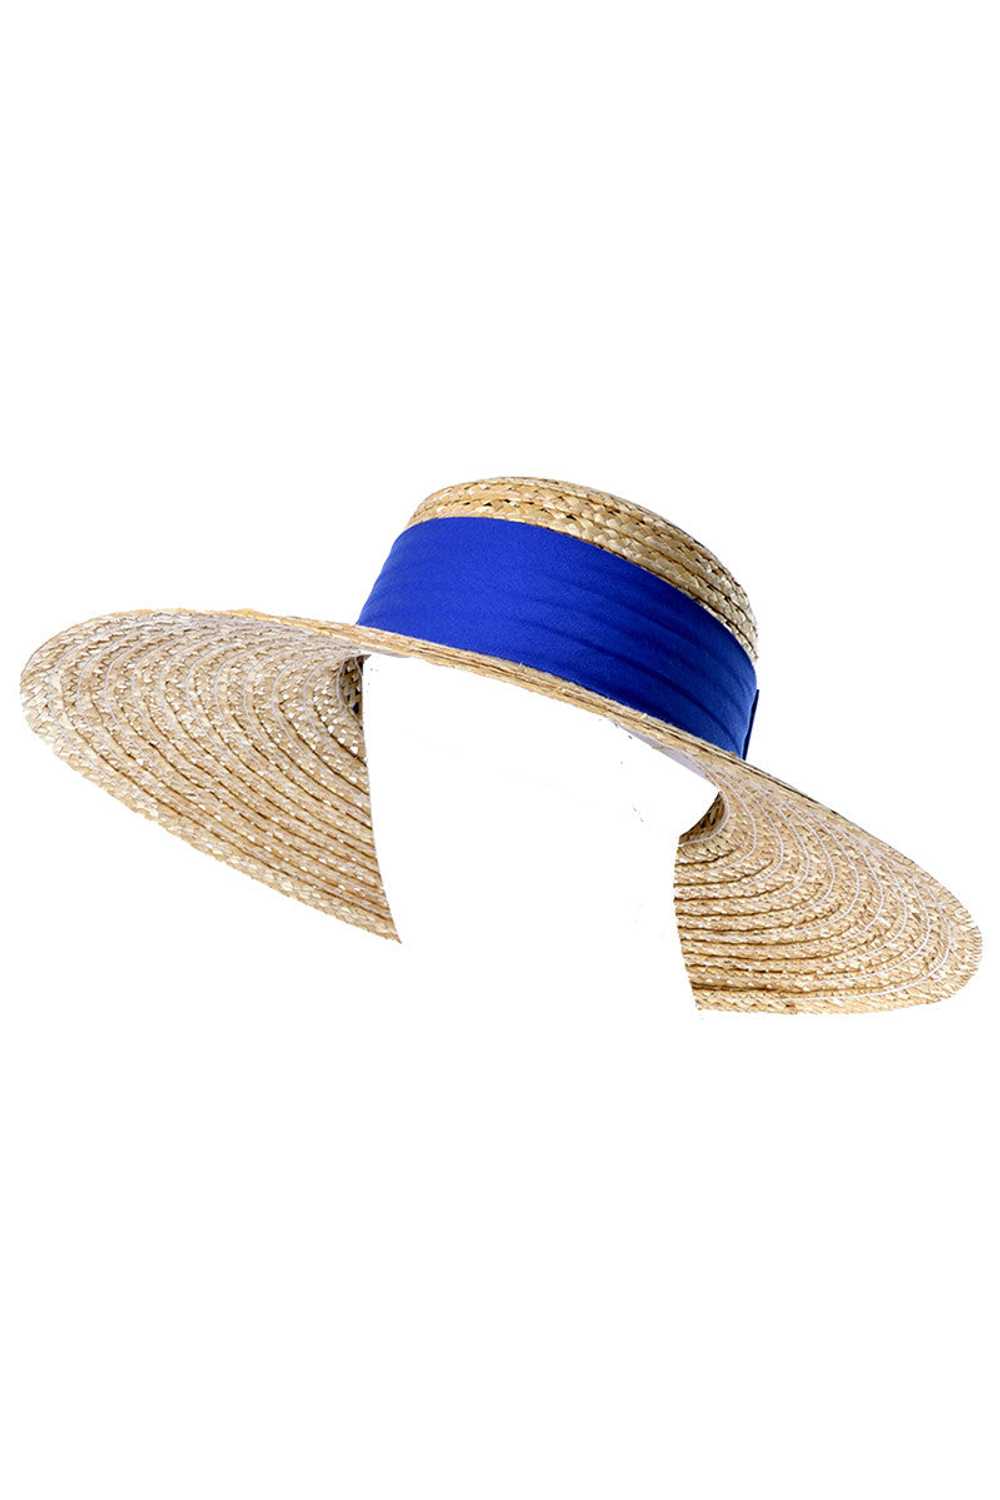 Vintage As New Straw Hat With Wide Brim Blue Ribb… - image 1